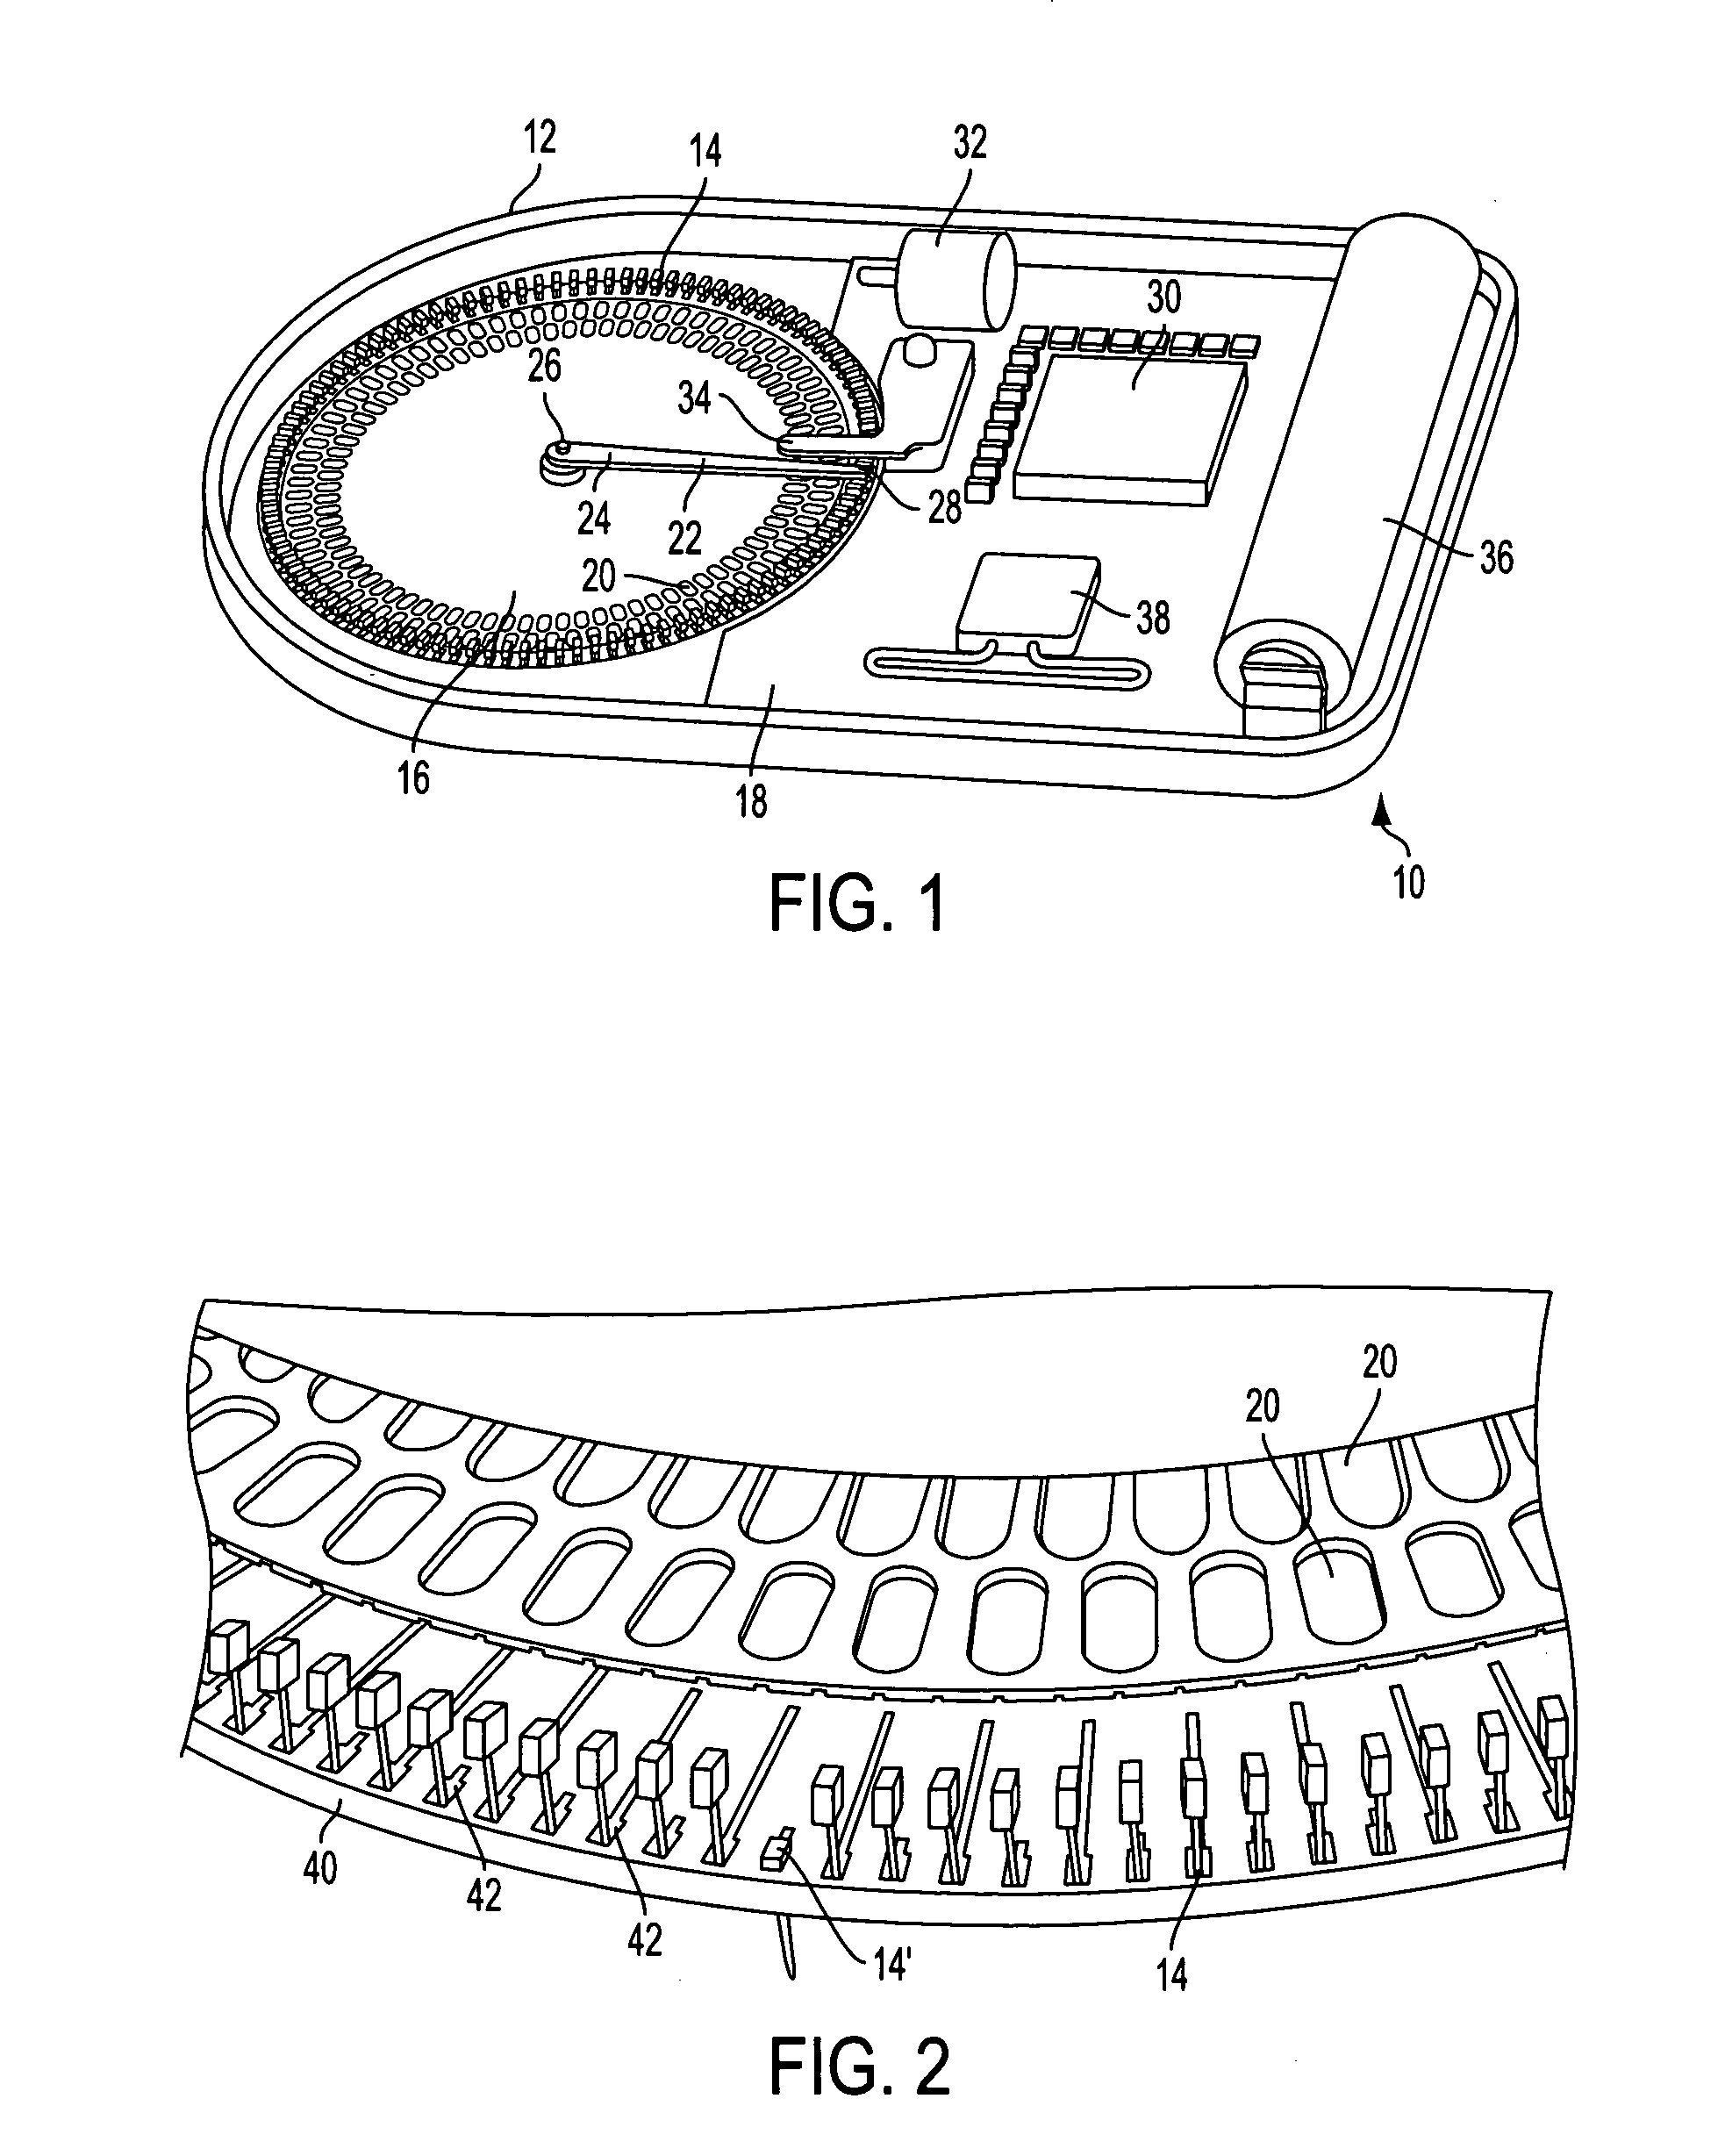 Autonomous, ambulatory analyte monitor or drug delivery device